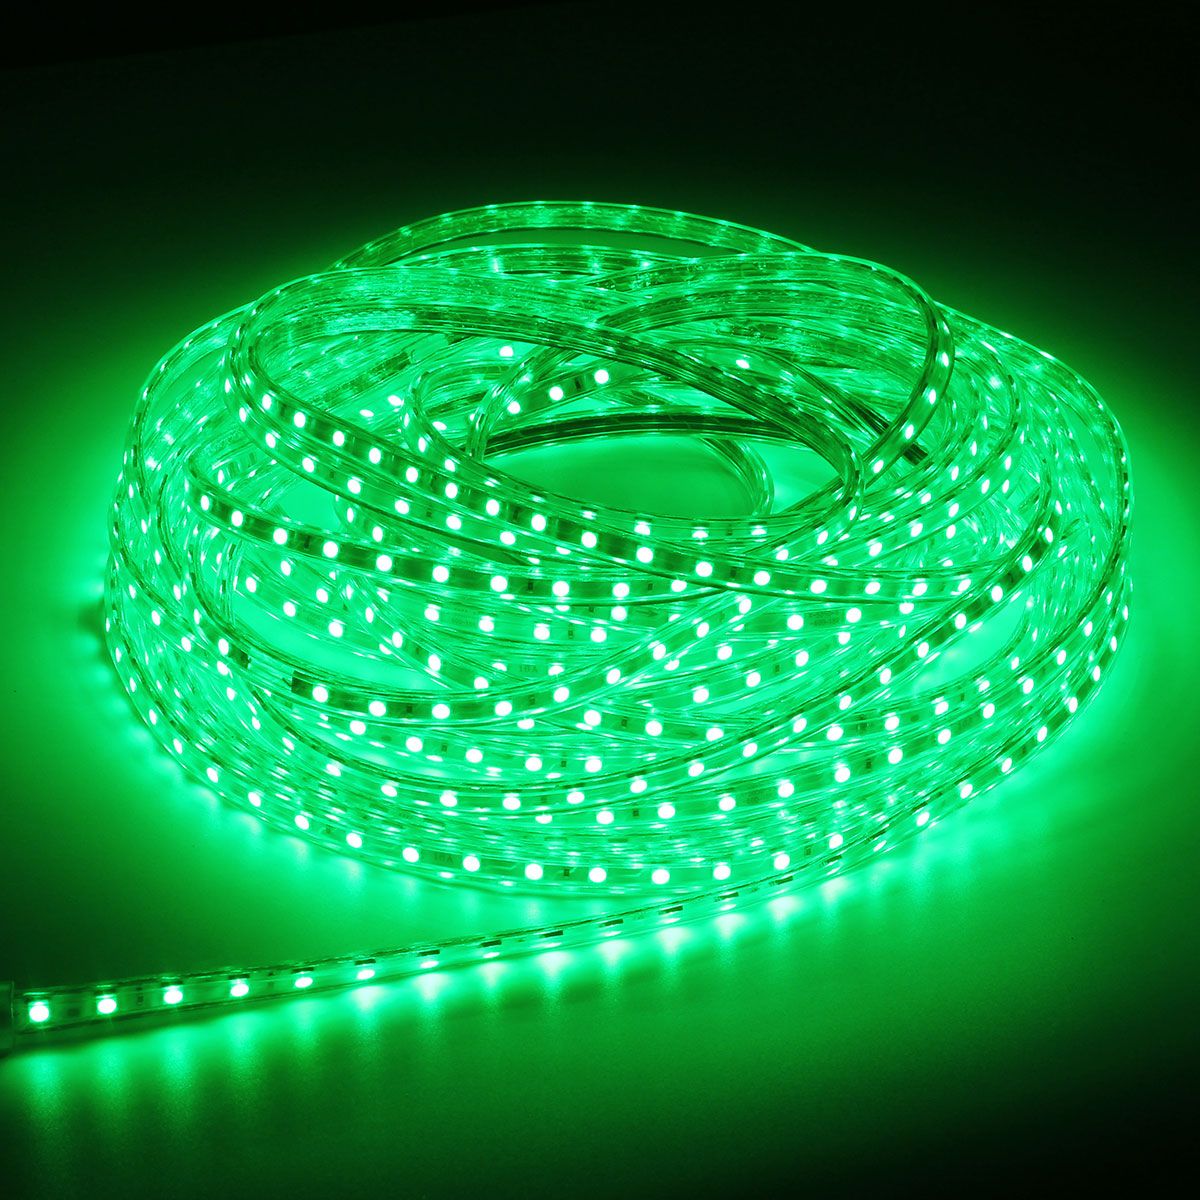 220V-14M-5050-LED-SMD-Outdoor-Waterproof-Flexible-Tape-Rope-Strip-Light-Xmas-1066375